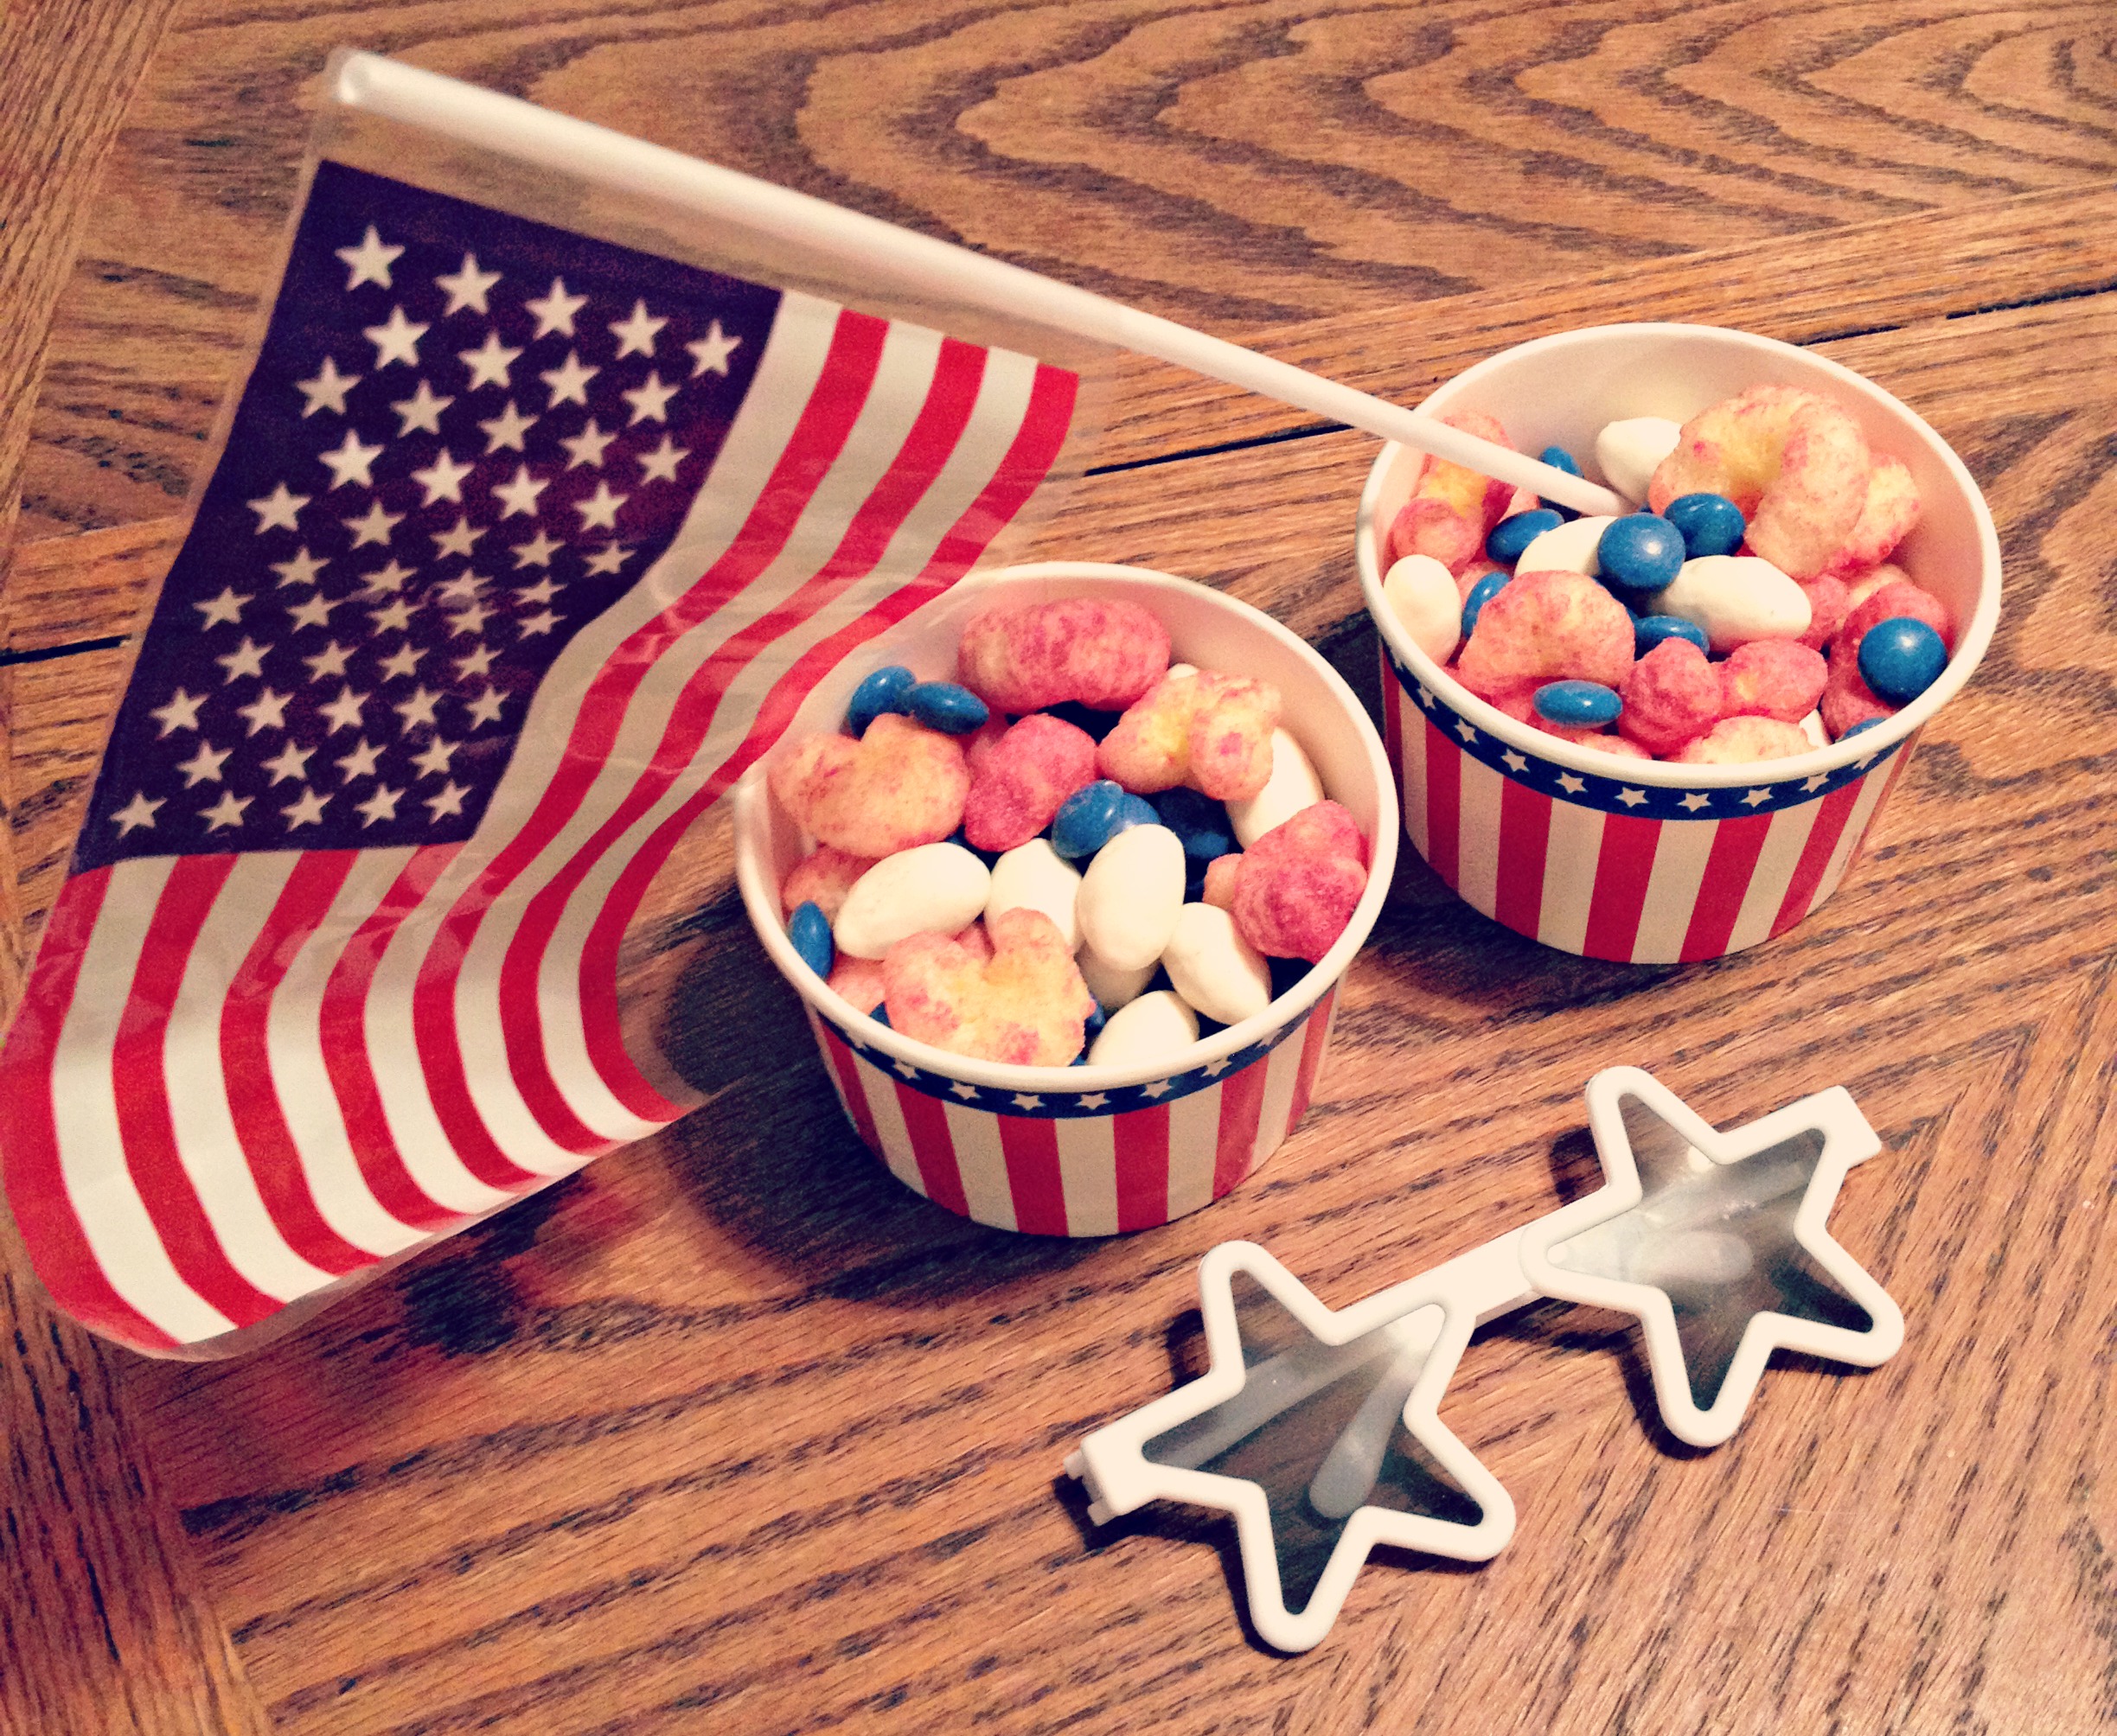 Forth of July Snack Recipe